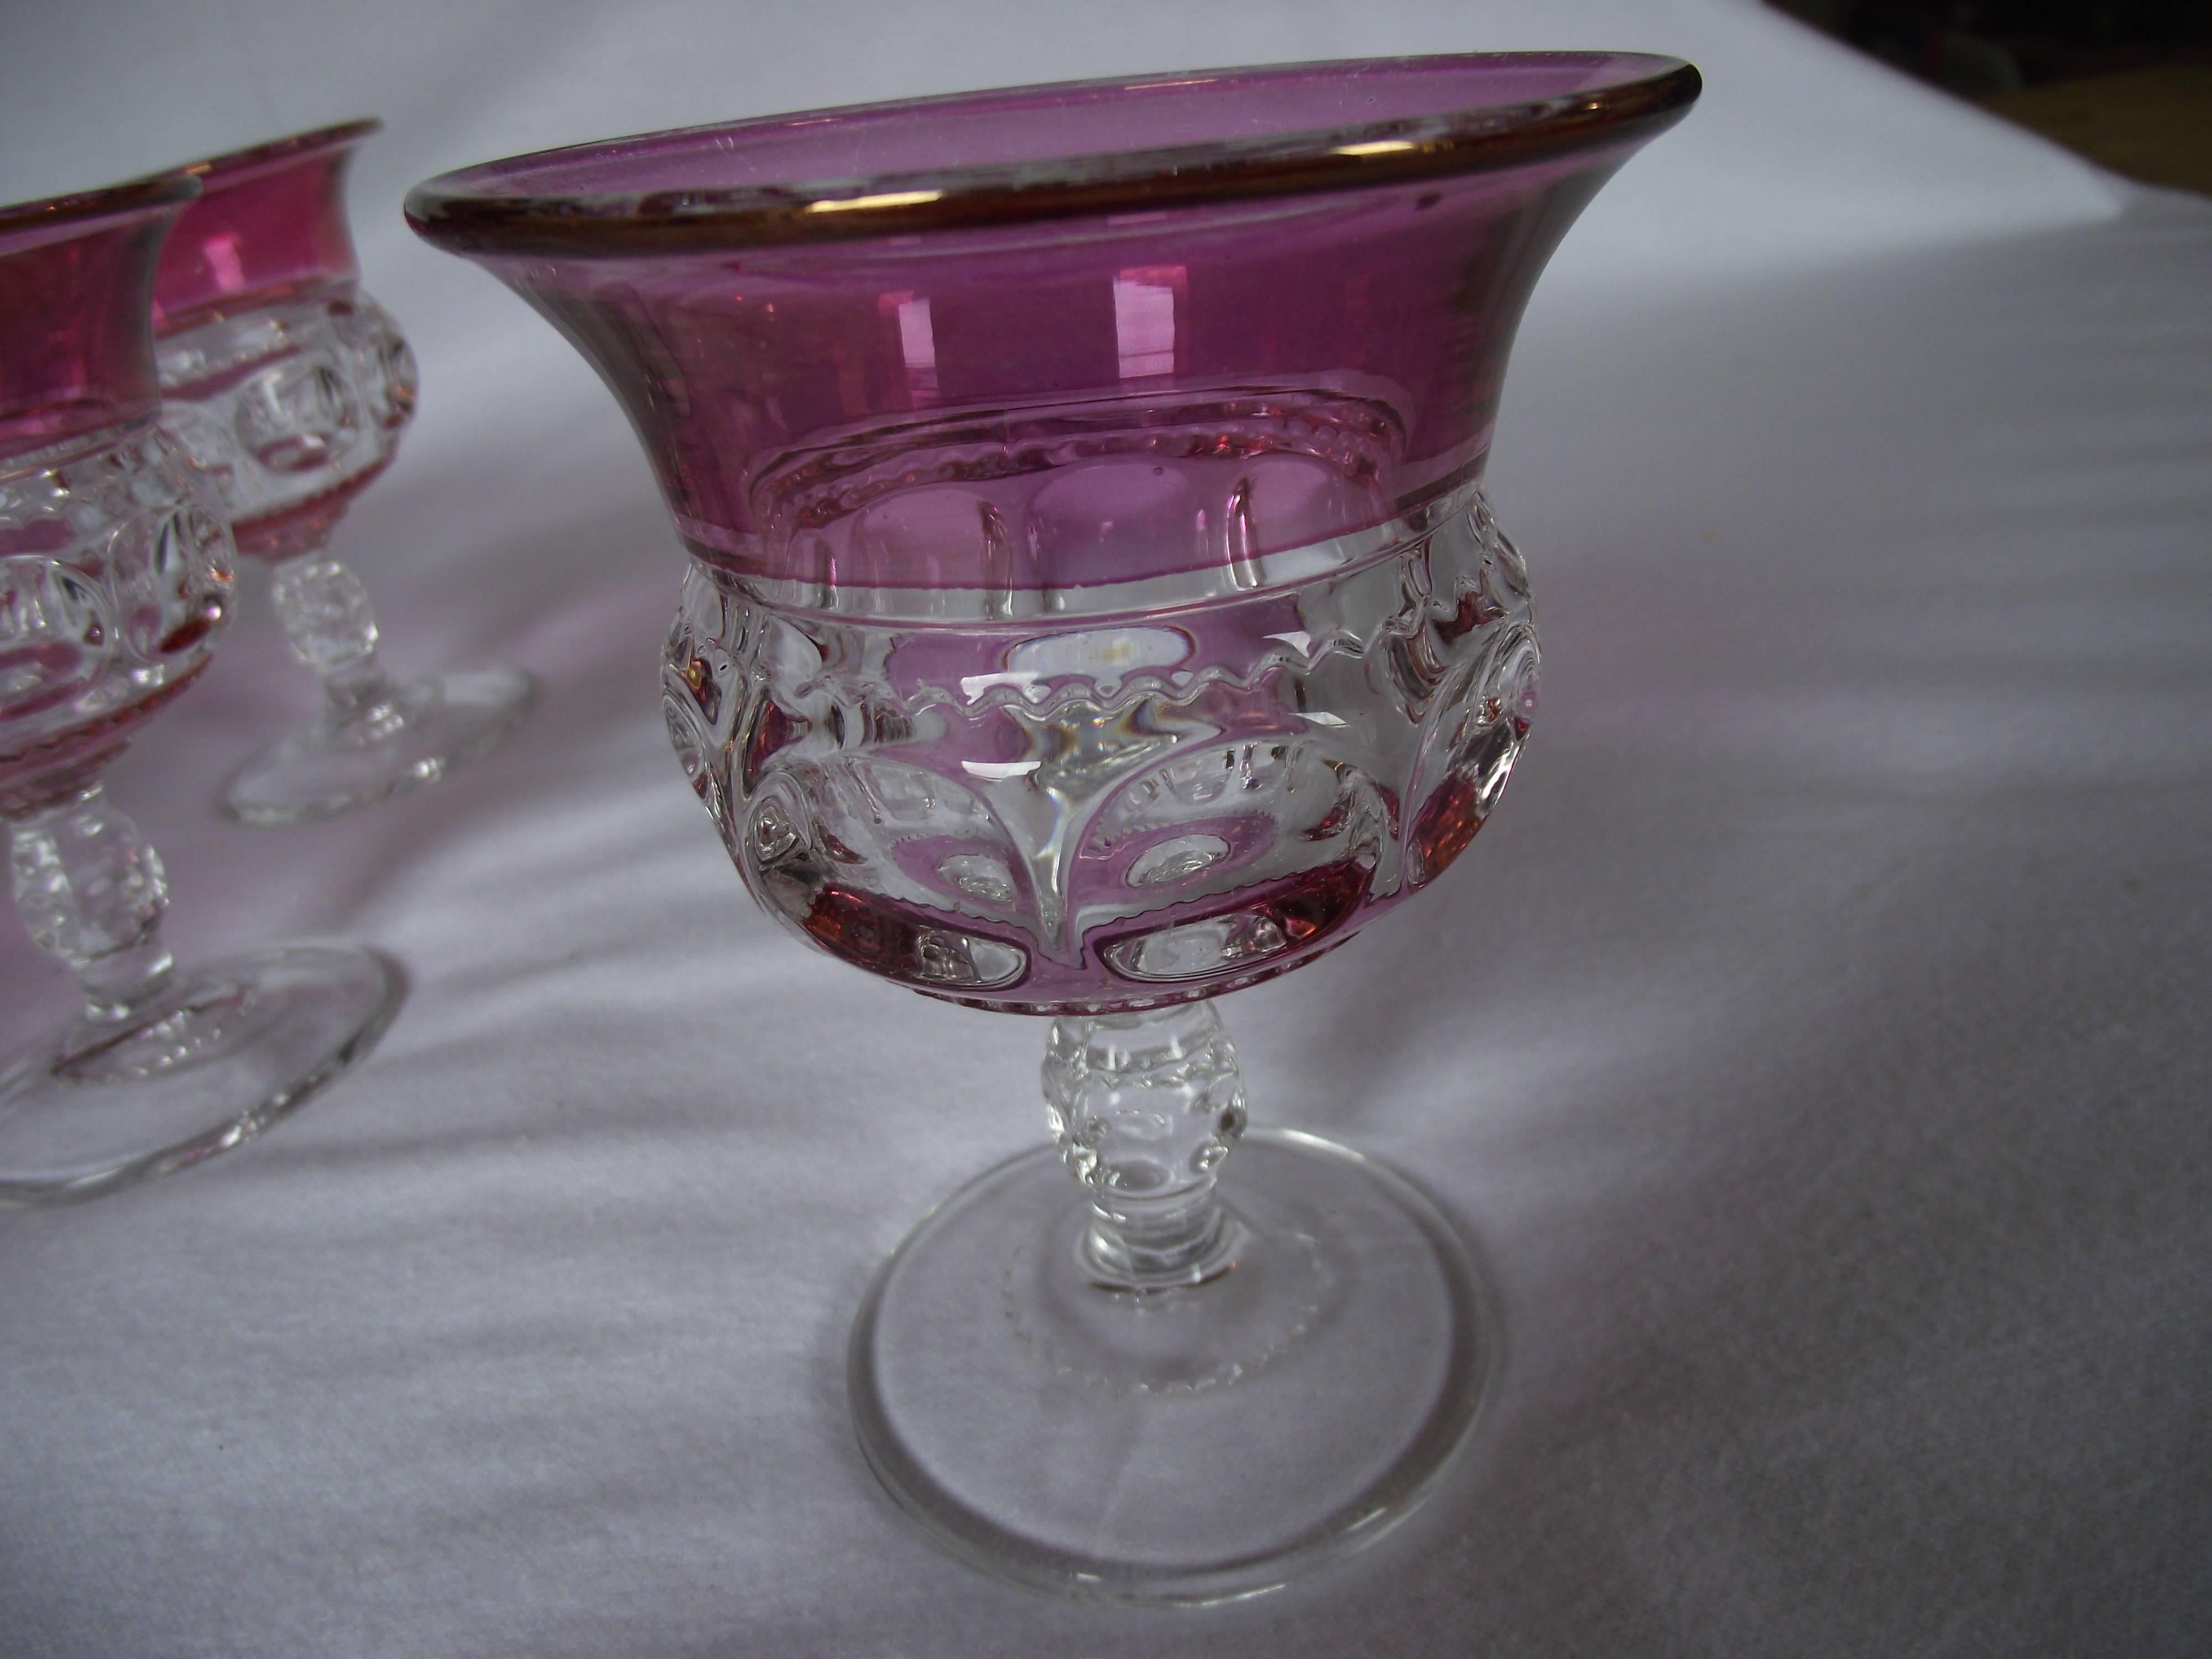 Set of 12 ruby flashed goblets. Very good condition. One glass has slight color loss. No chips.